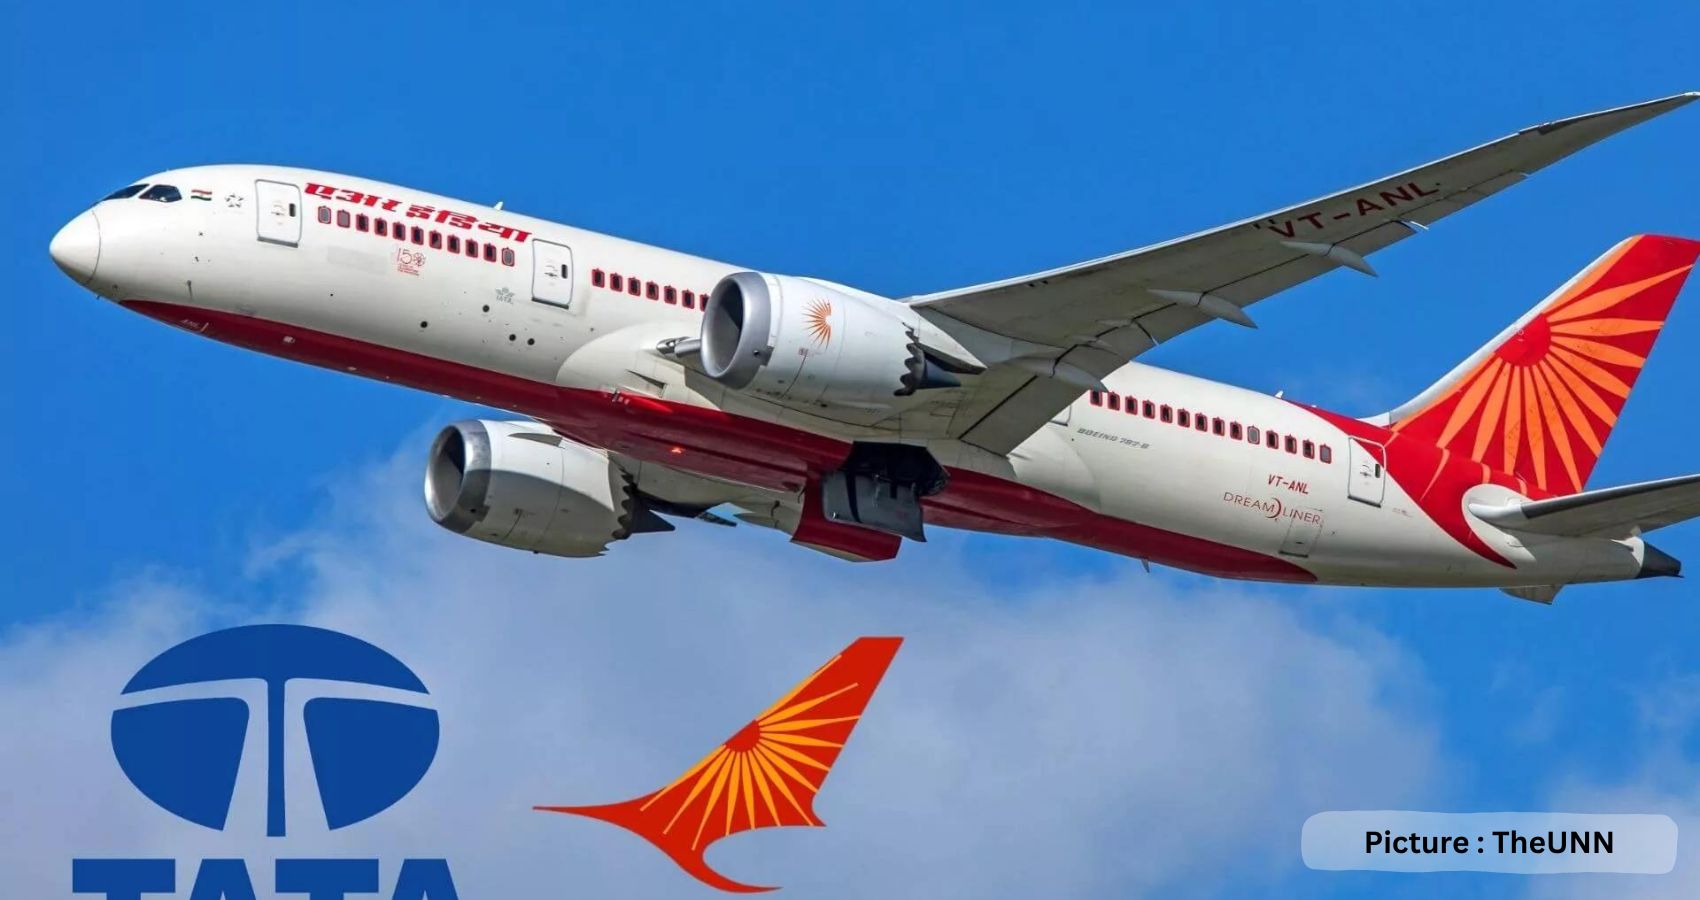 Air India To Hire Over 4,200 Cabin Crew, 900 Pilots After Record Aircraft Deal